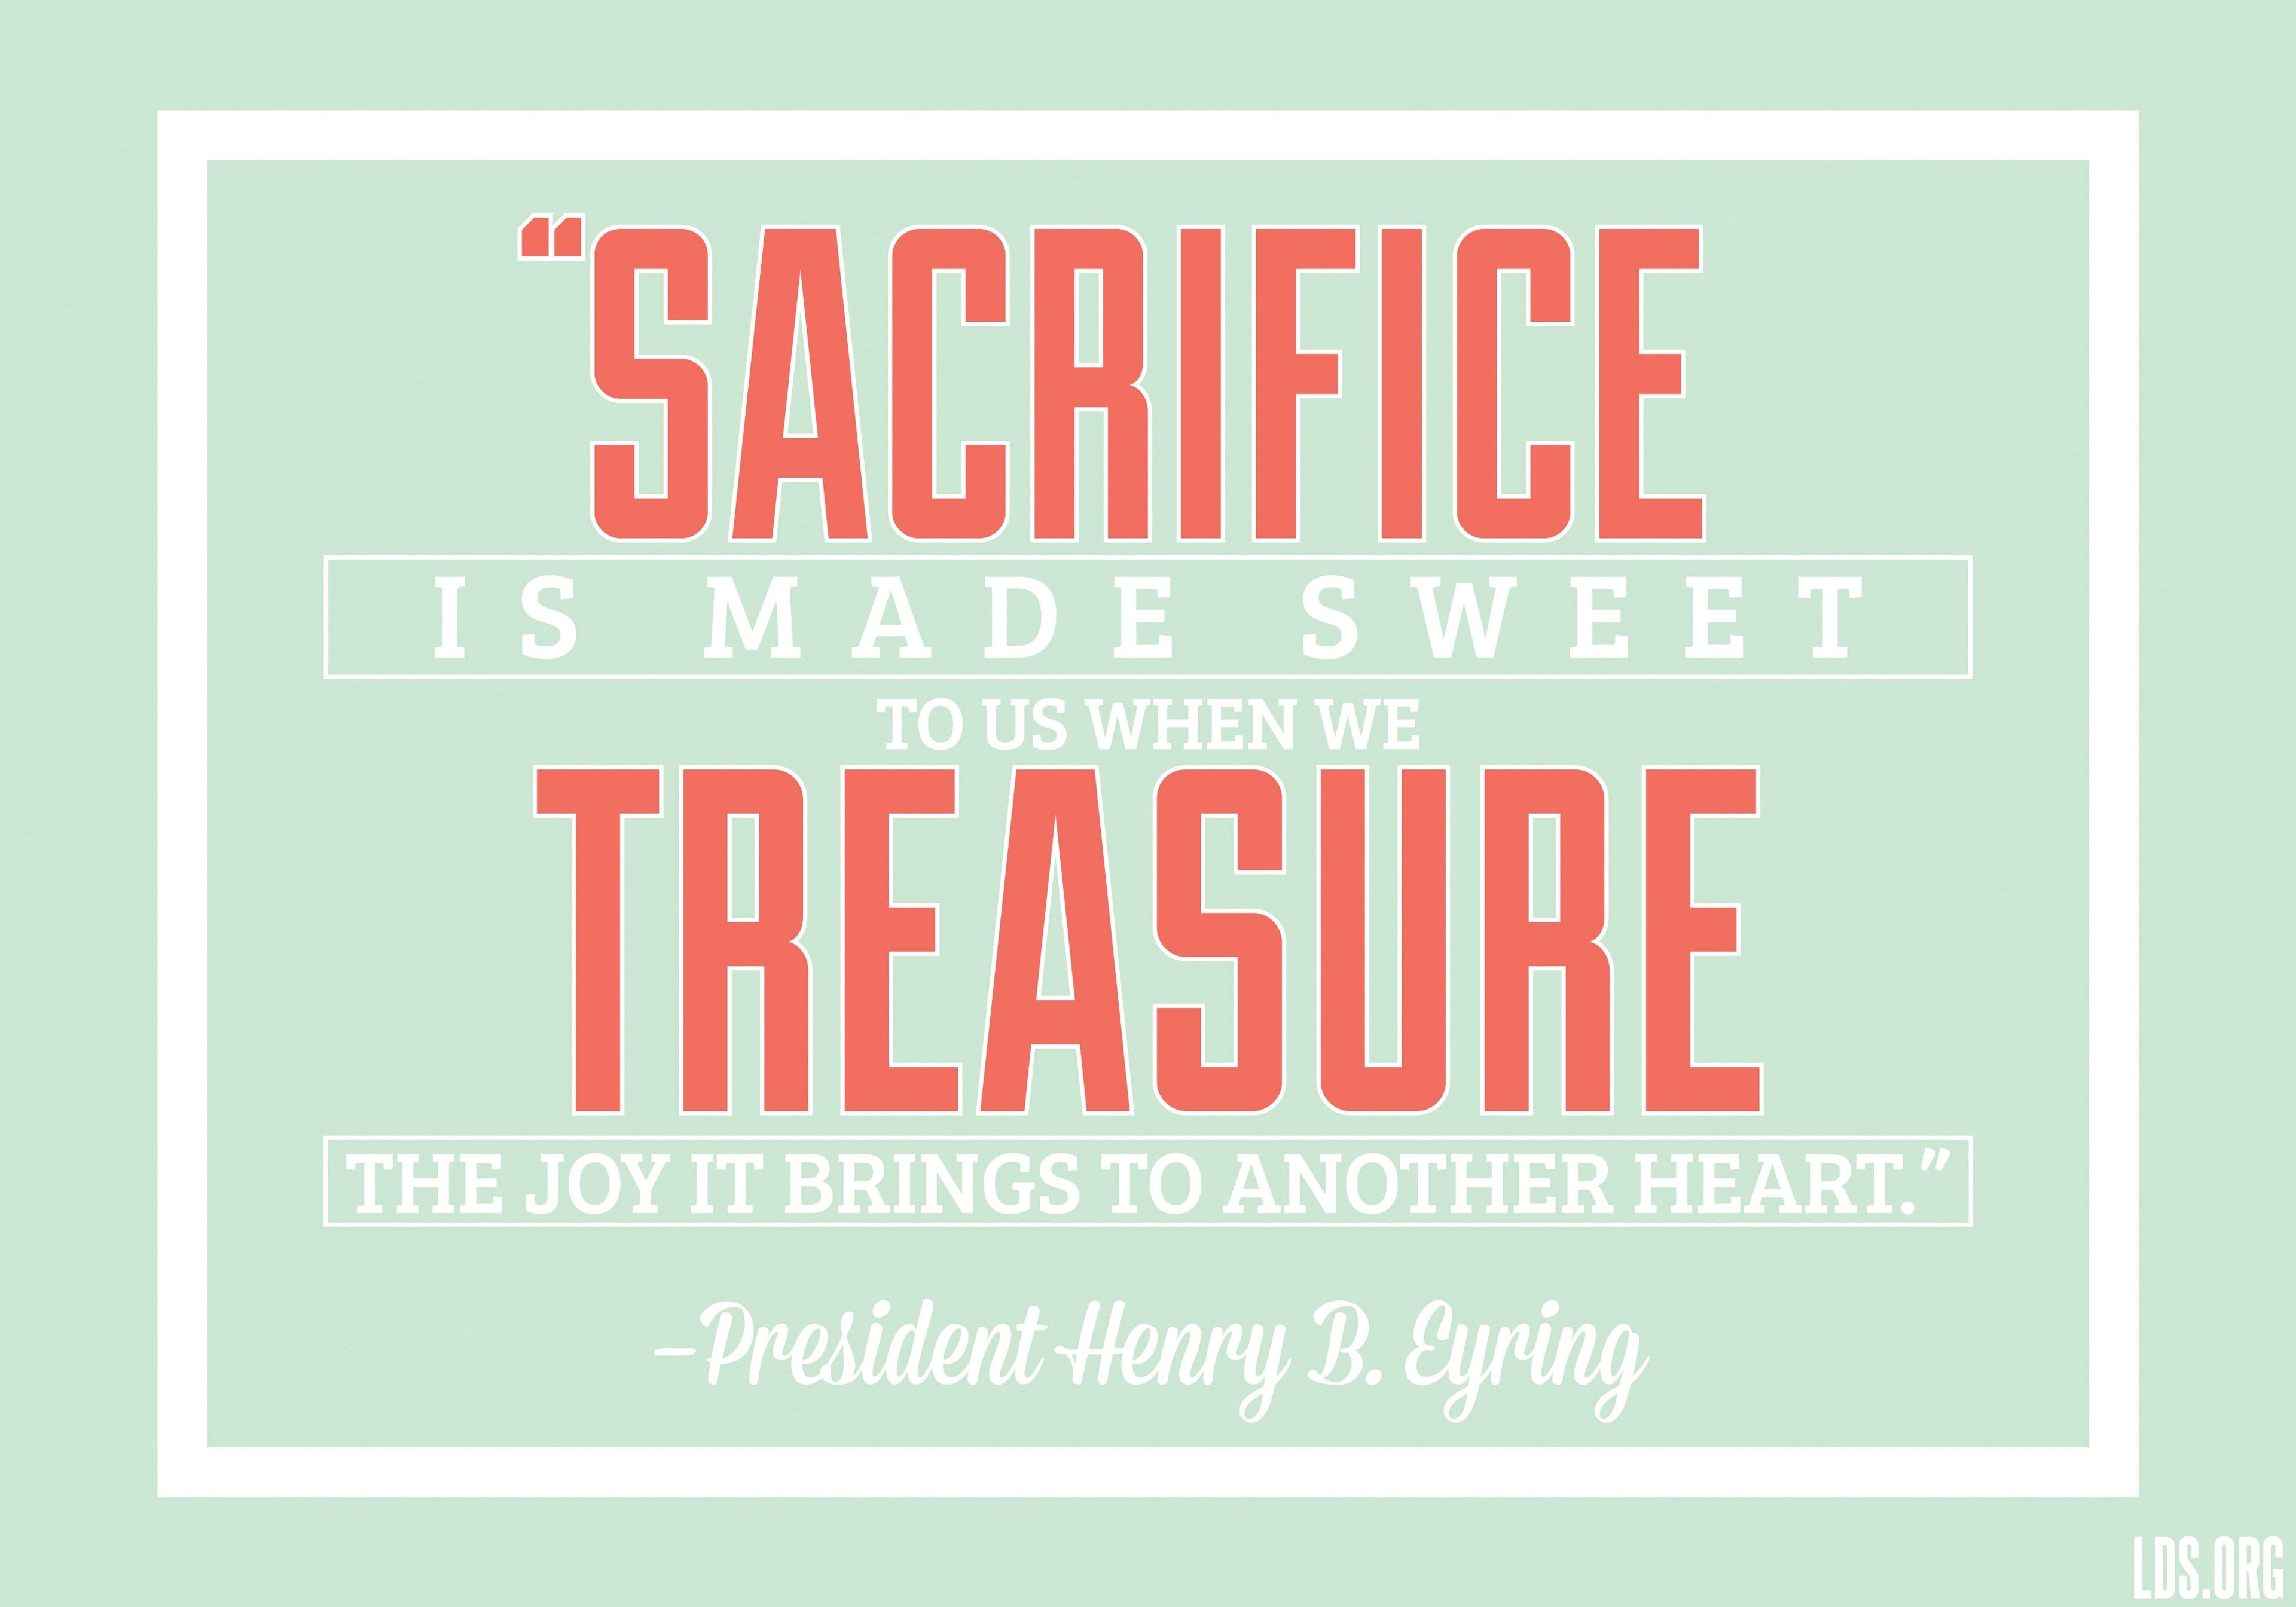 “Sacrifice is made sweet to us when we treasure the joy it brings to another heart.”—President Henry B. Eyring, “Gifts of Love”